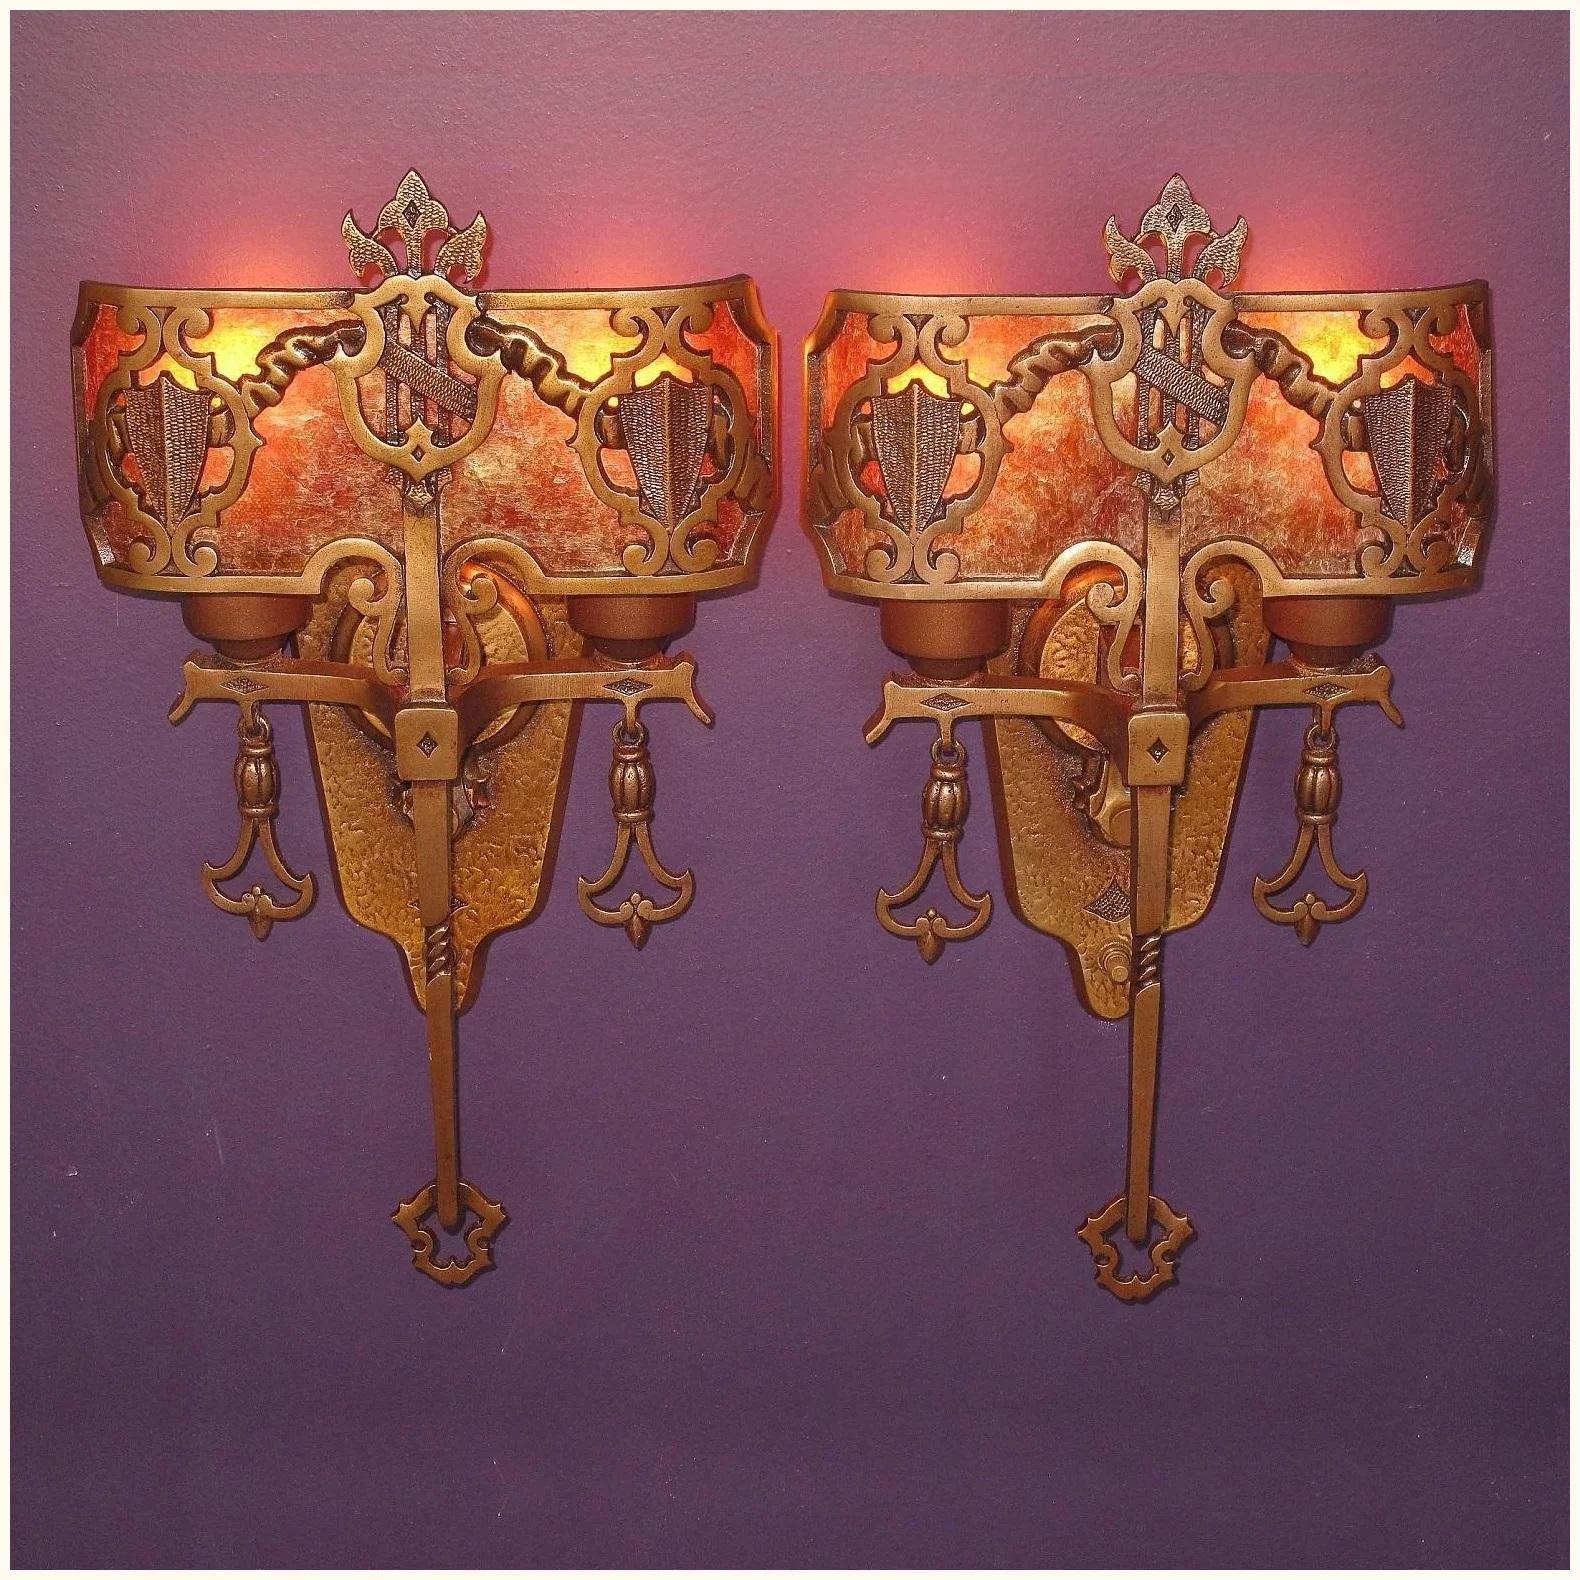 Priced per pair.
Solid bronze 2 bulb Tudor / Spanish Revival style vintage 1920s wall sconces. Renewed finish and light bulbs have a new amber mica shade. Nice complement to any Spanish Revival, Gothic, or Tudor home.
Bronze casting is still sharp